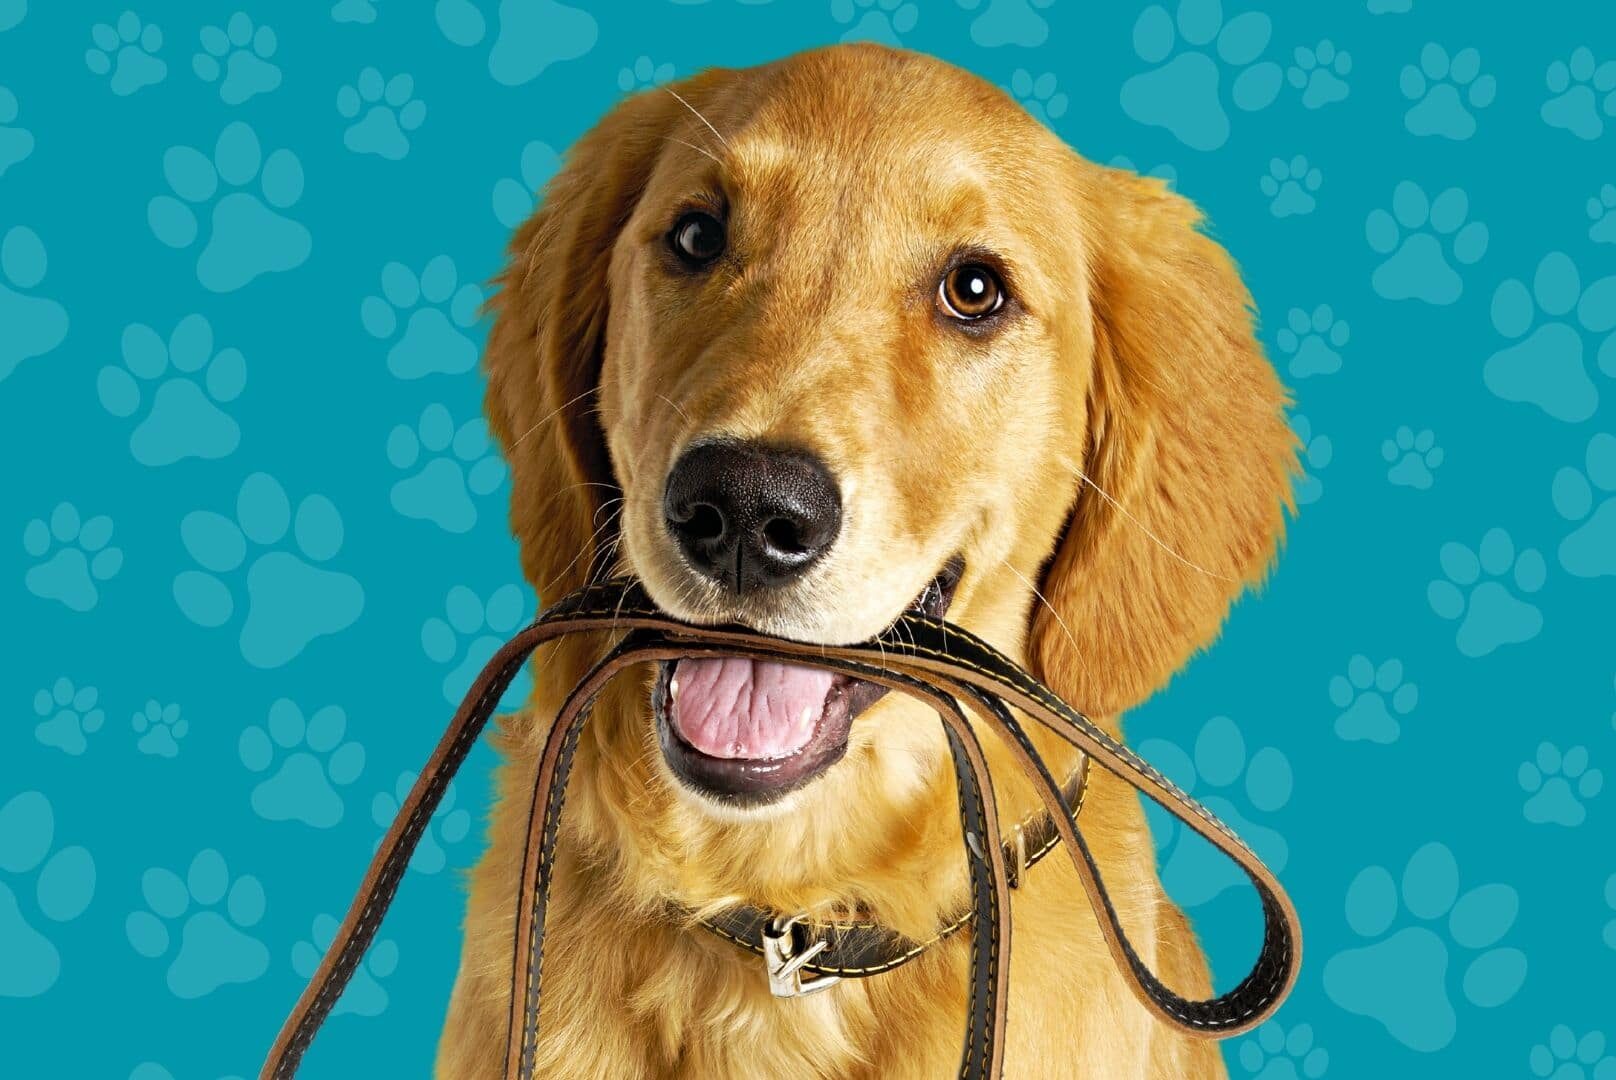 Labrador dog holding leash in mouth in front of blue background with paw prints.